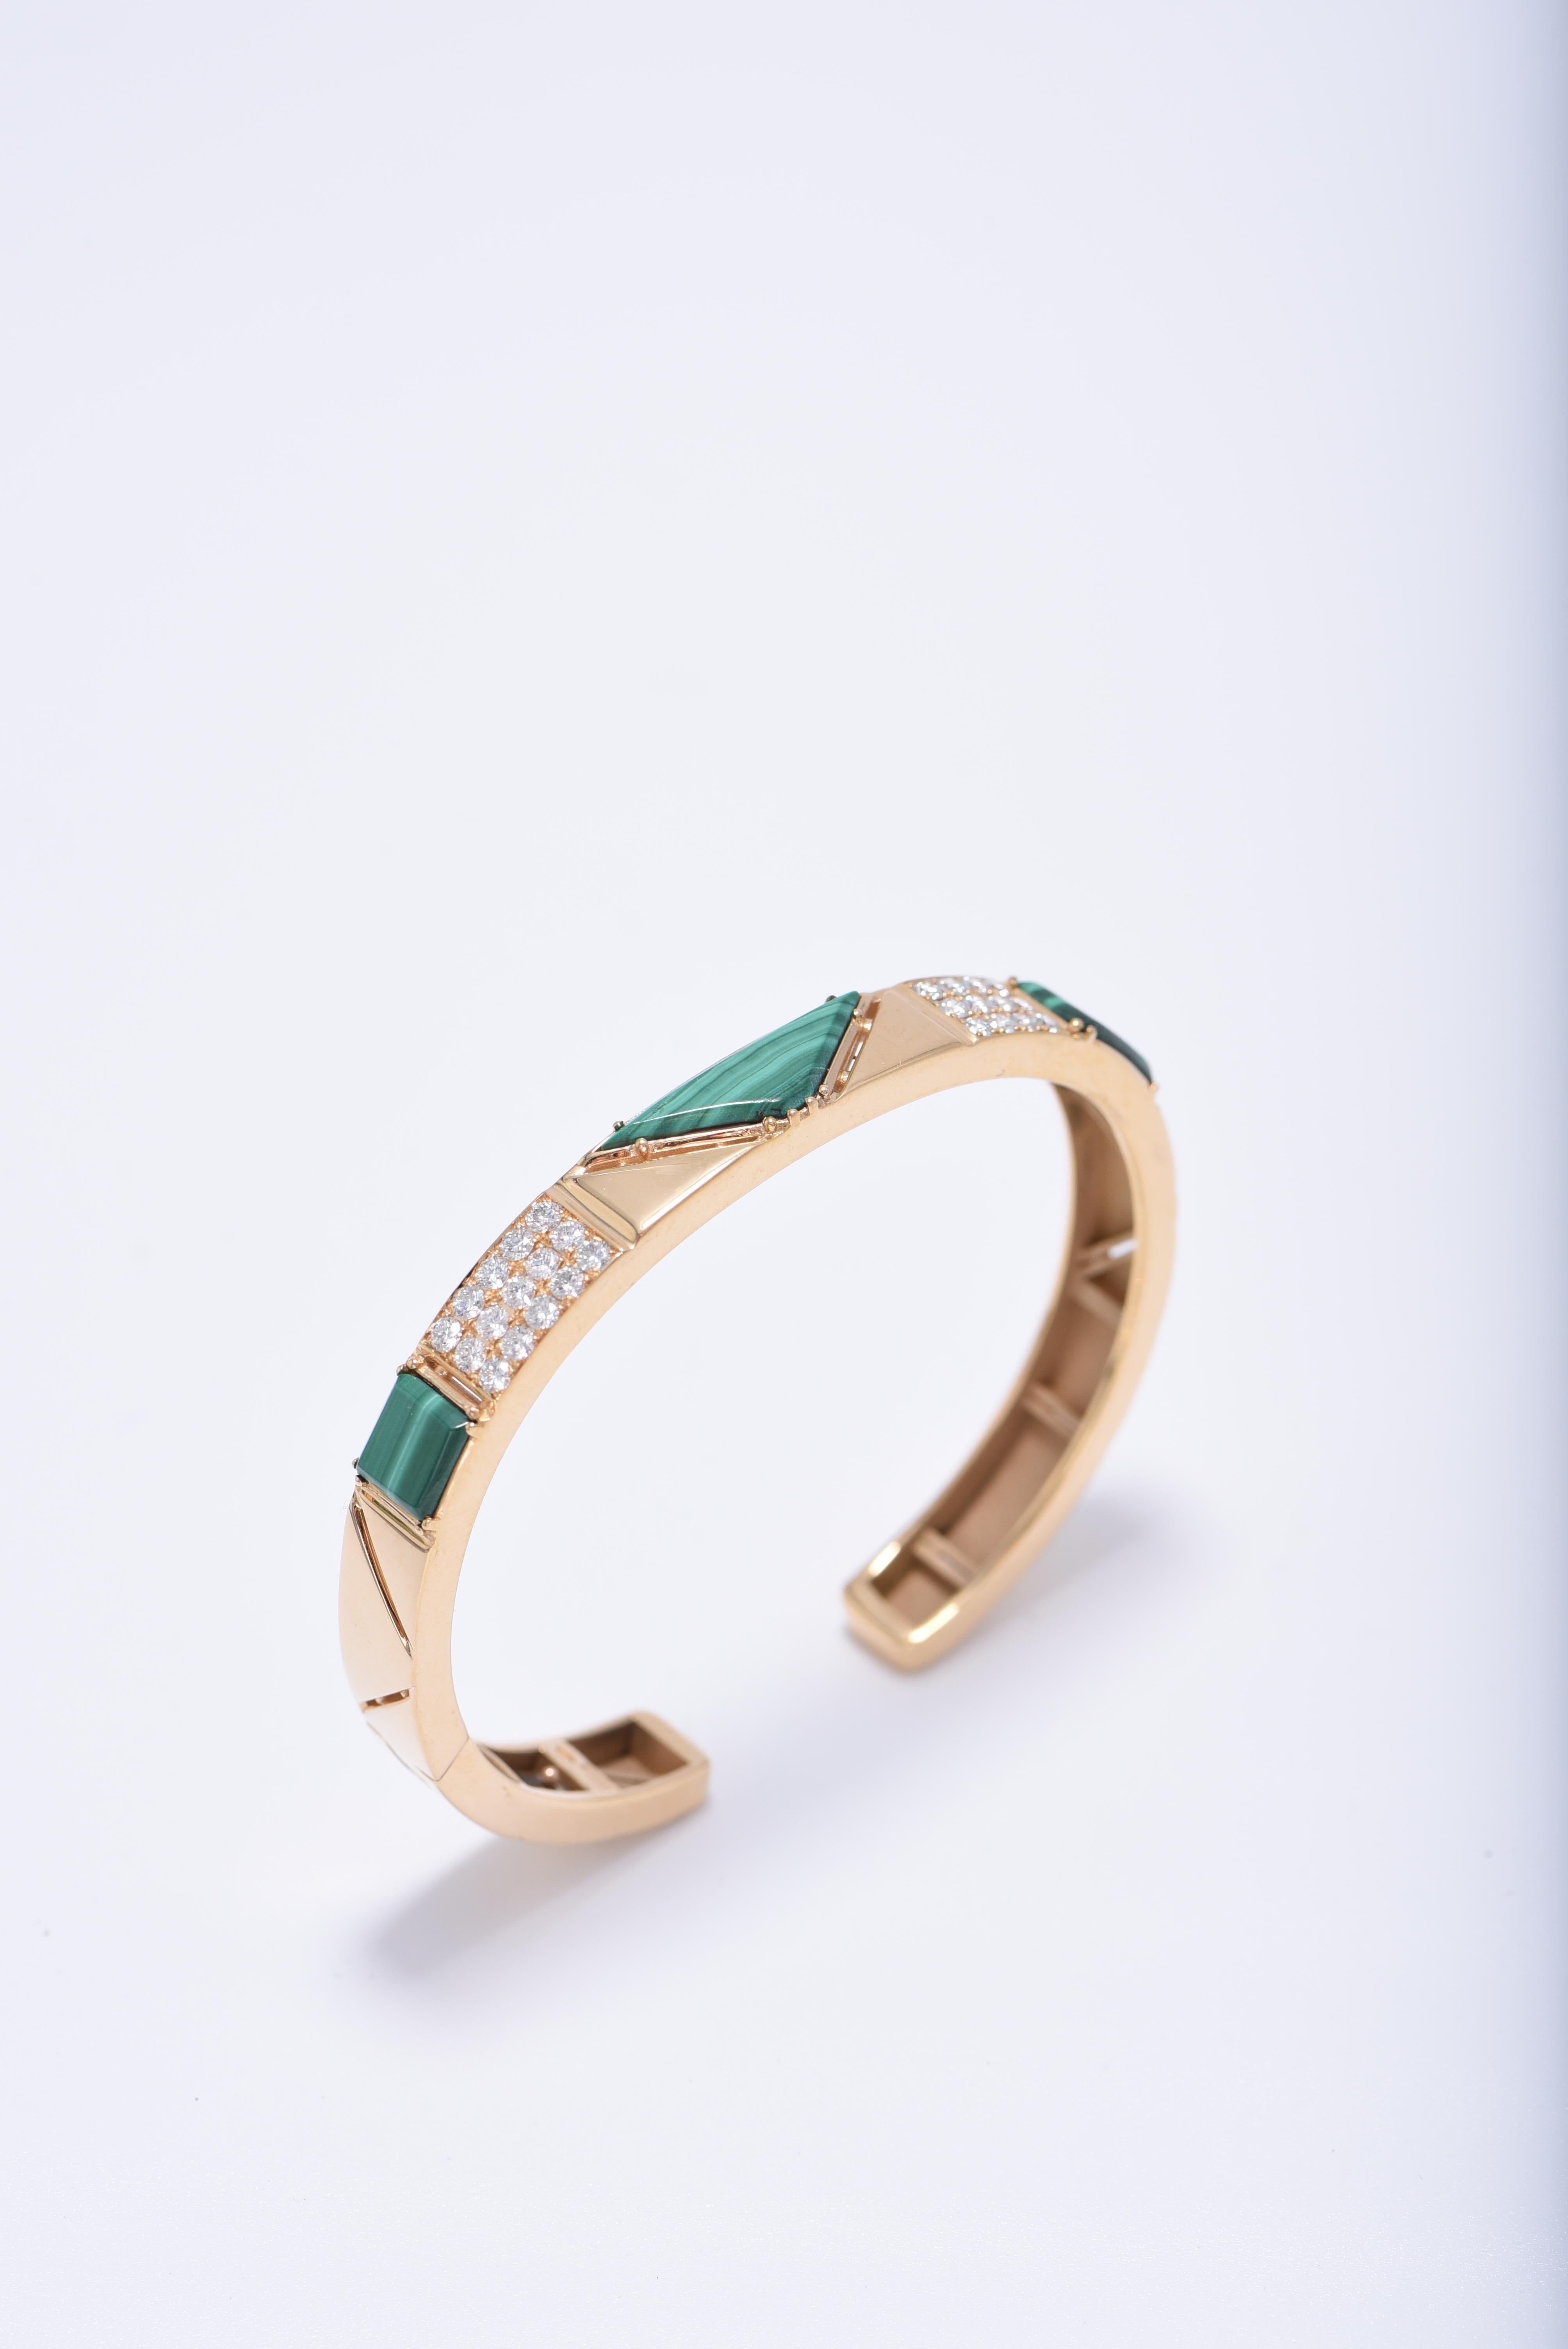 Cuff from Miseno's Baia collection in 18K yellow gold (approx. 26 grams) with white diamonds (approx. 0.97 carats) and malachite